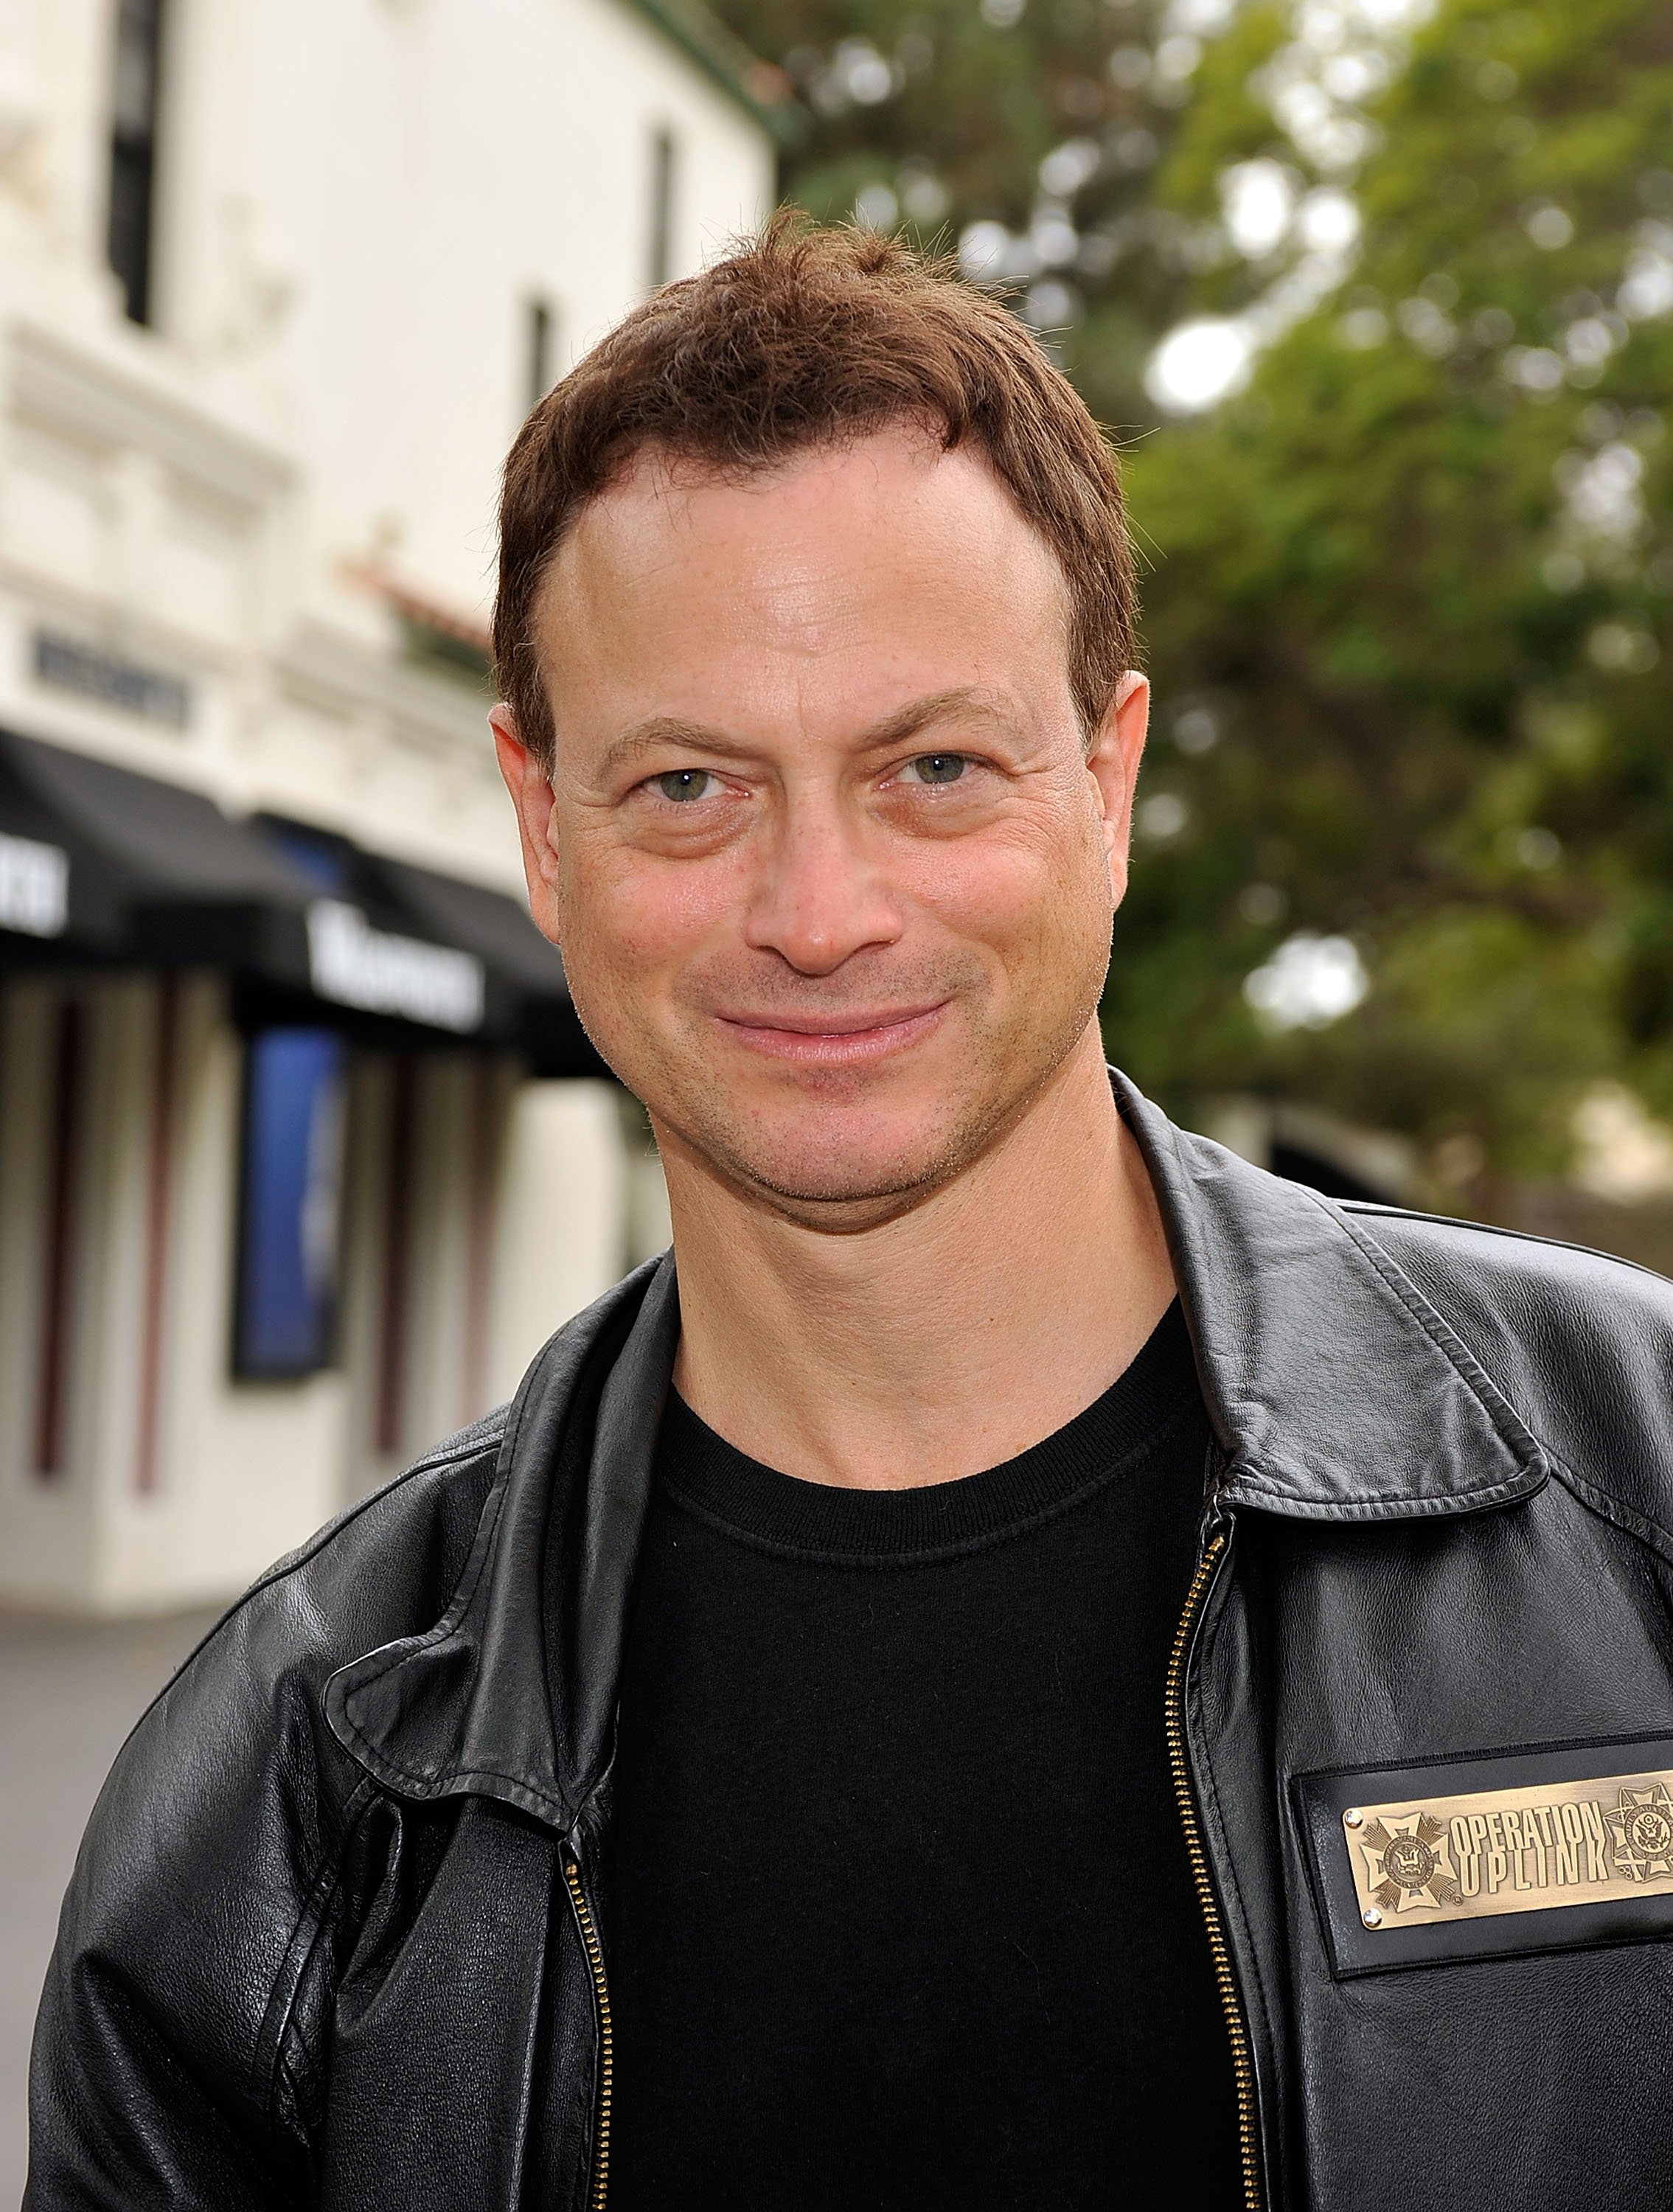 Gary Sinise attends the USO's Road 2 Recovery on October 4, 2008 at the Wadsworth Theater Parking Lot in Los Angeles, California. | Source: Getty Images 